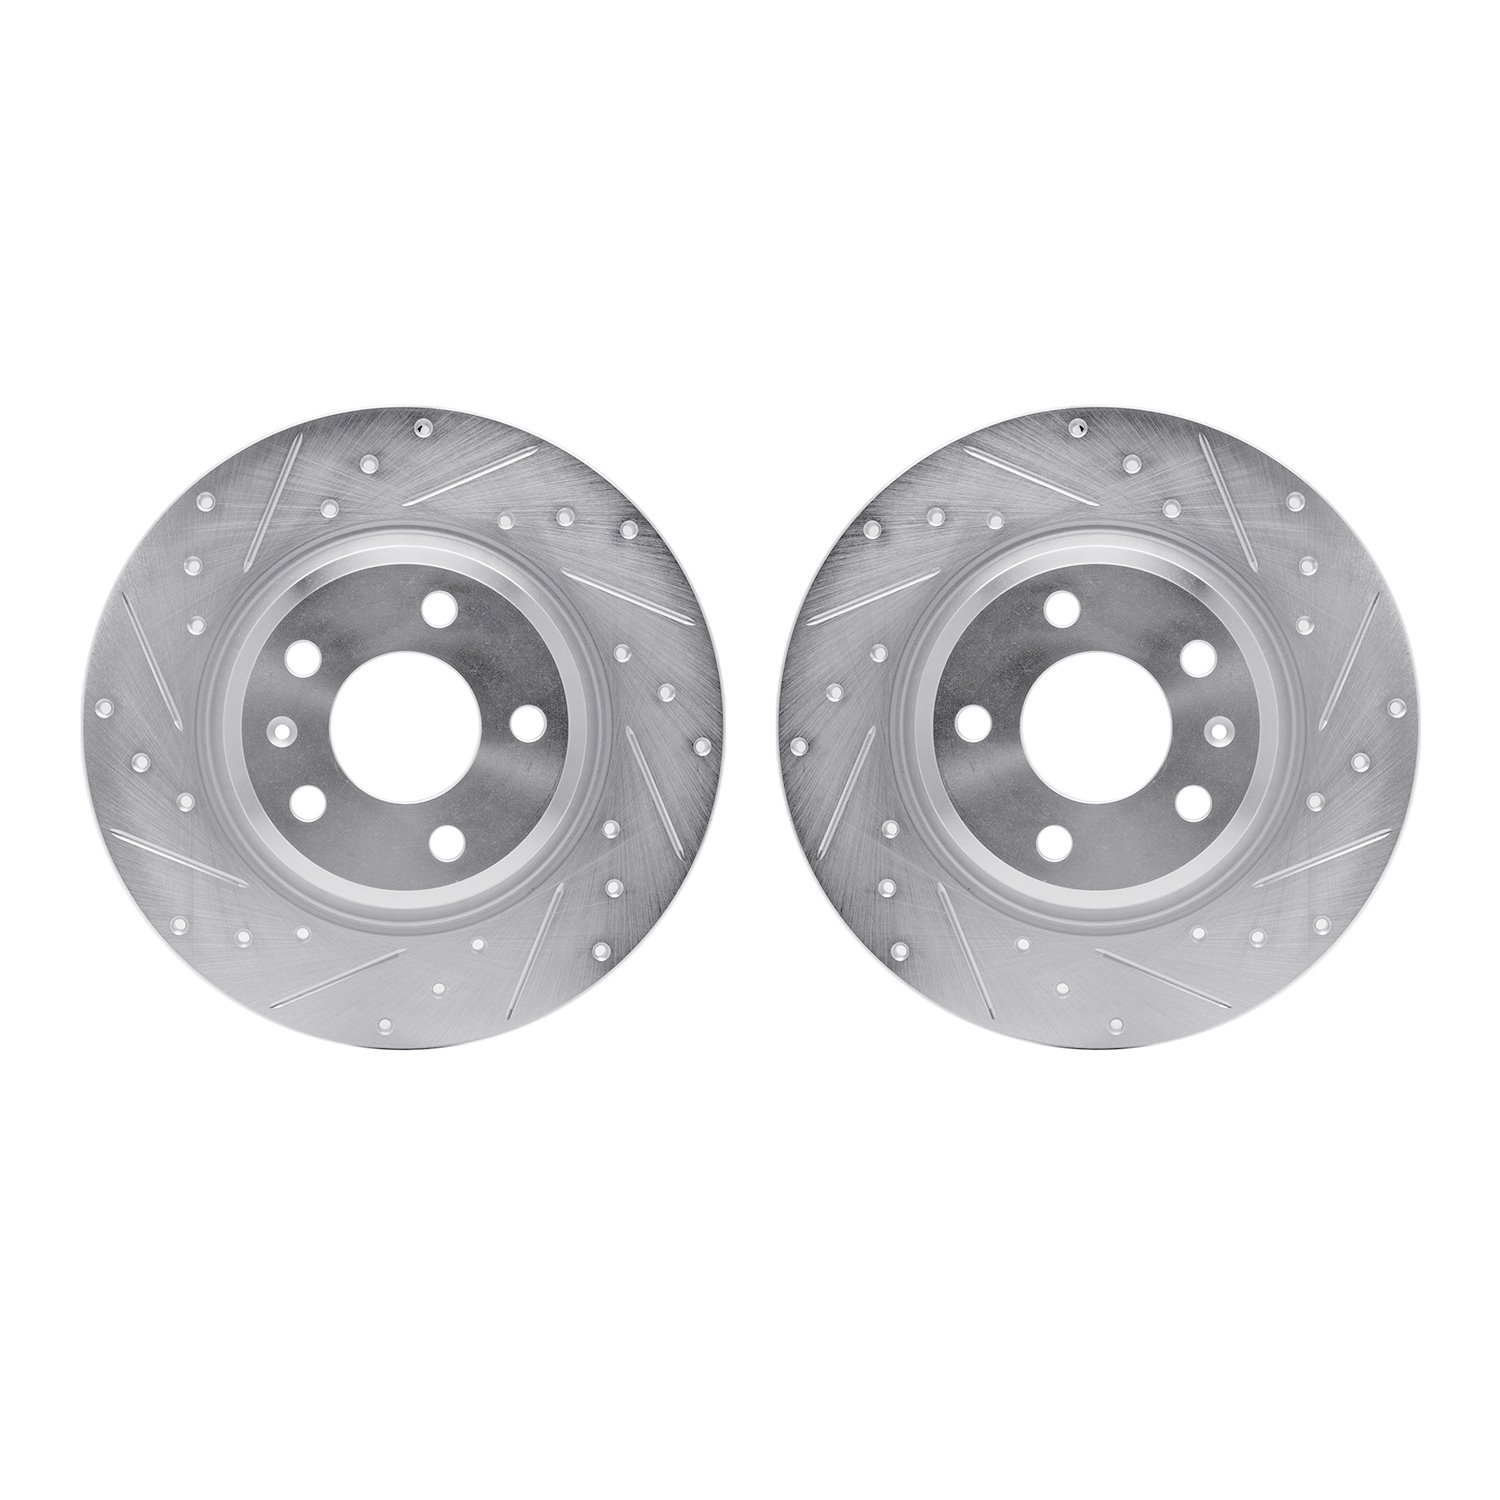 7002-73050 Drilled/Slotted Brake Rotors [Silver], Fits Select Audi/Volkswagen, Position: Rear